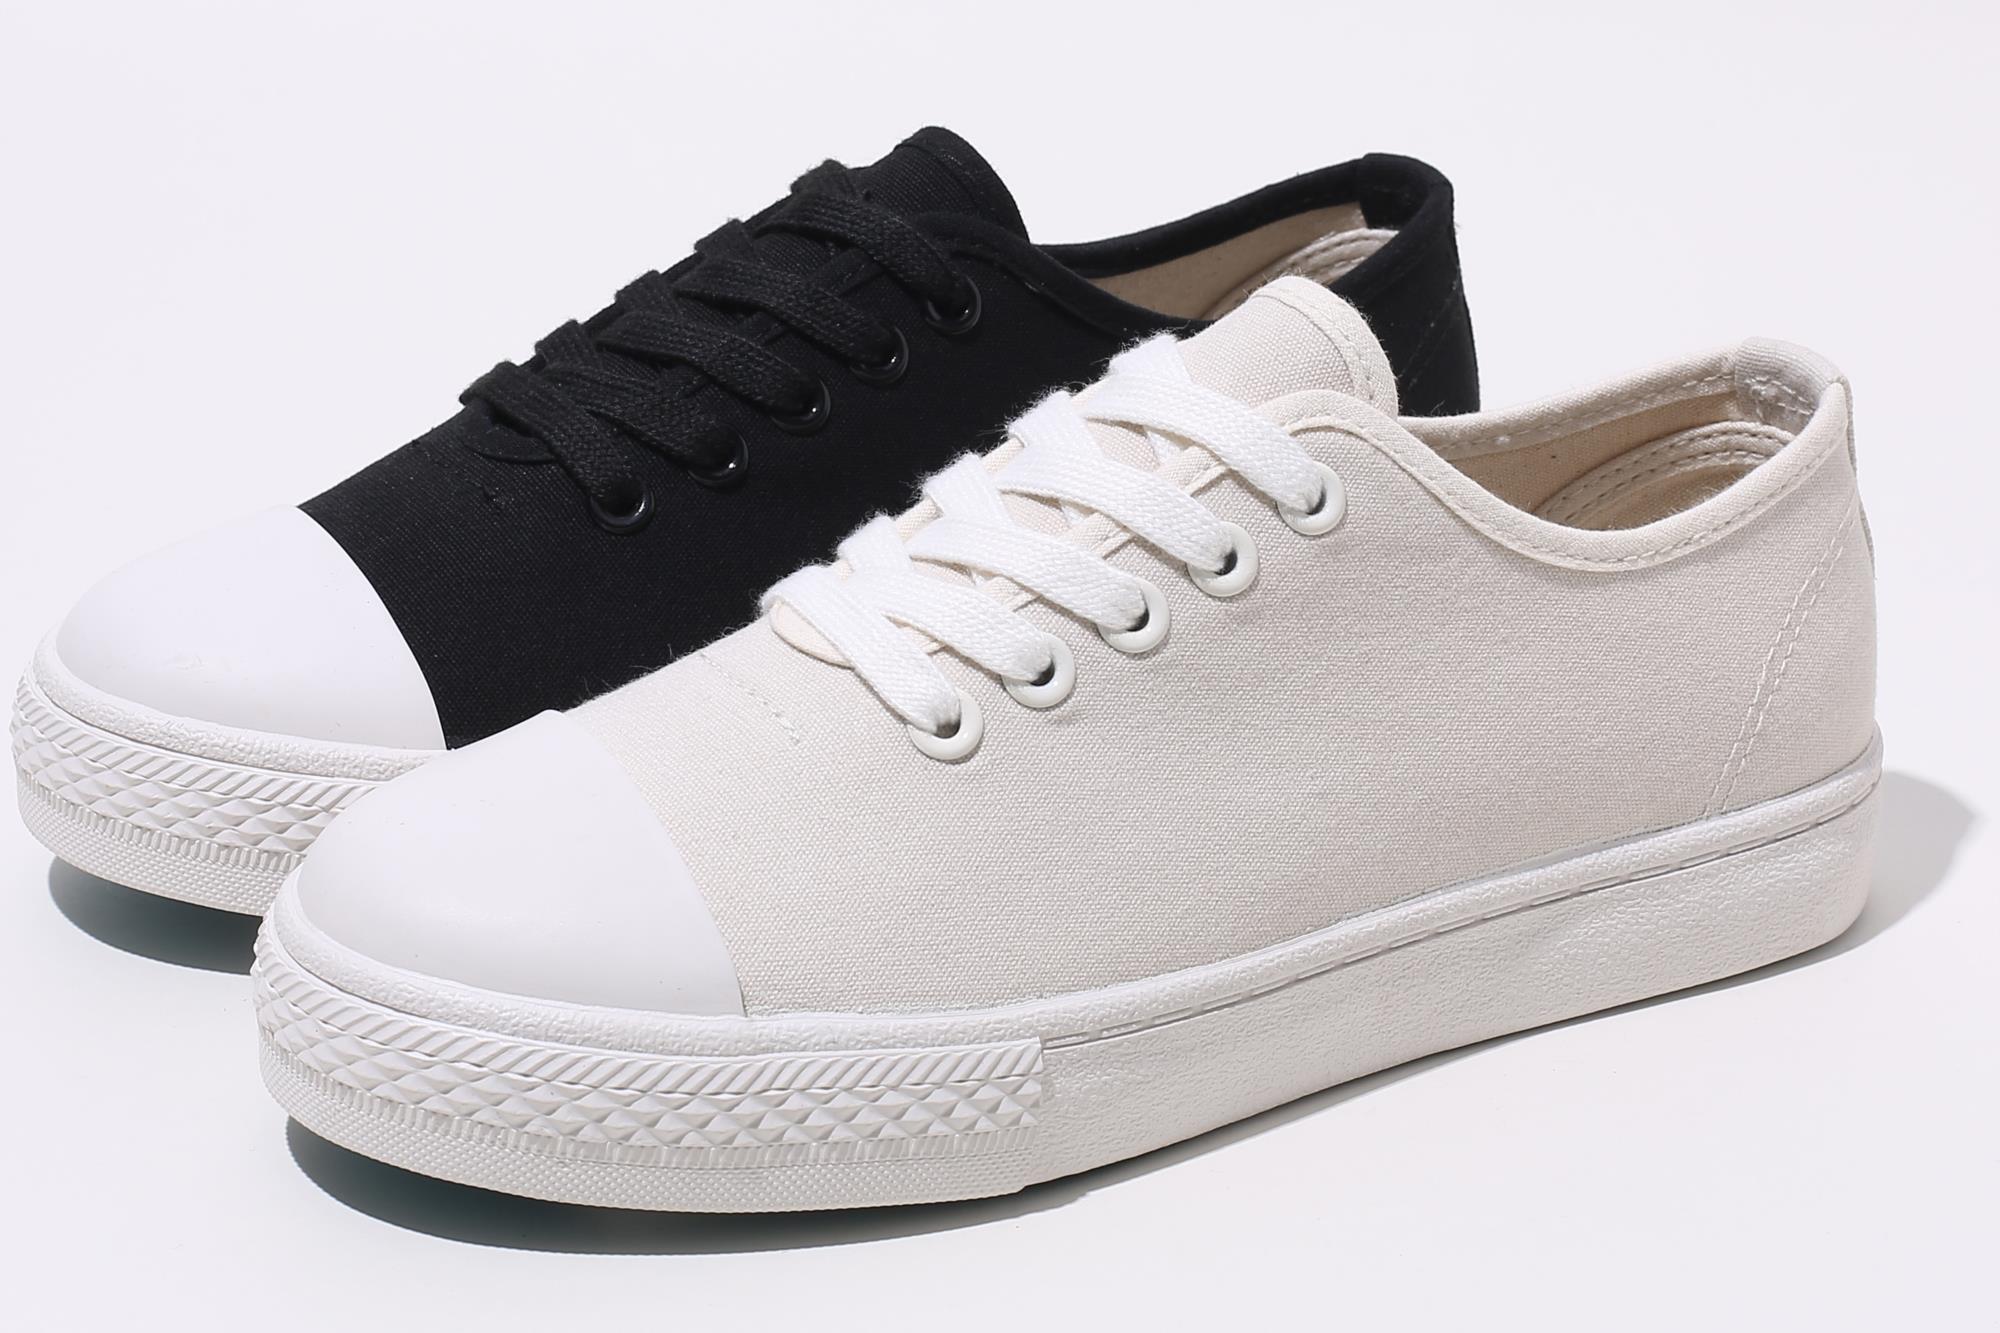 wholesale high quality black and white shoes flat canvas shoes for woman 